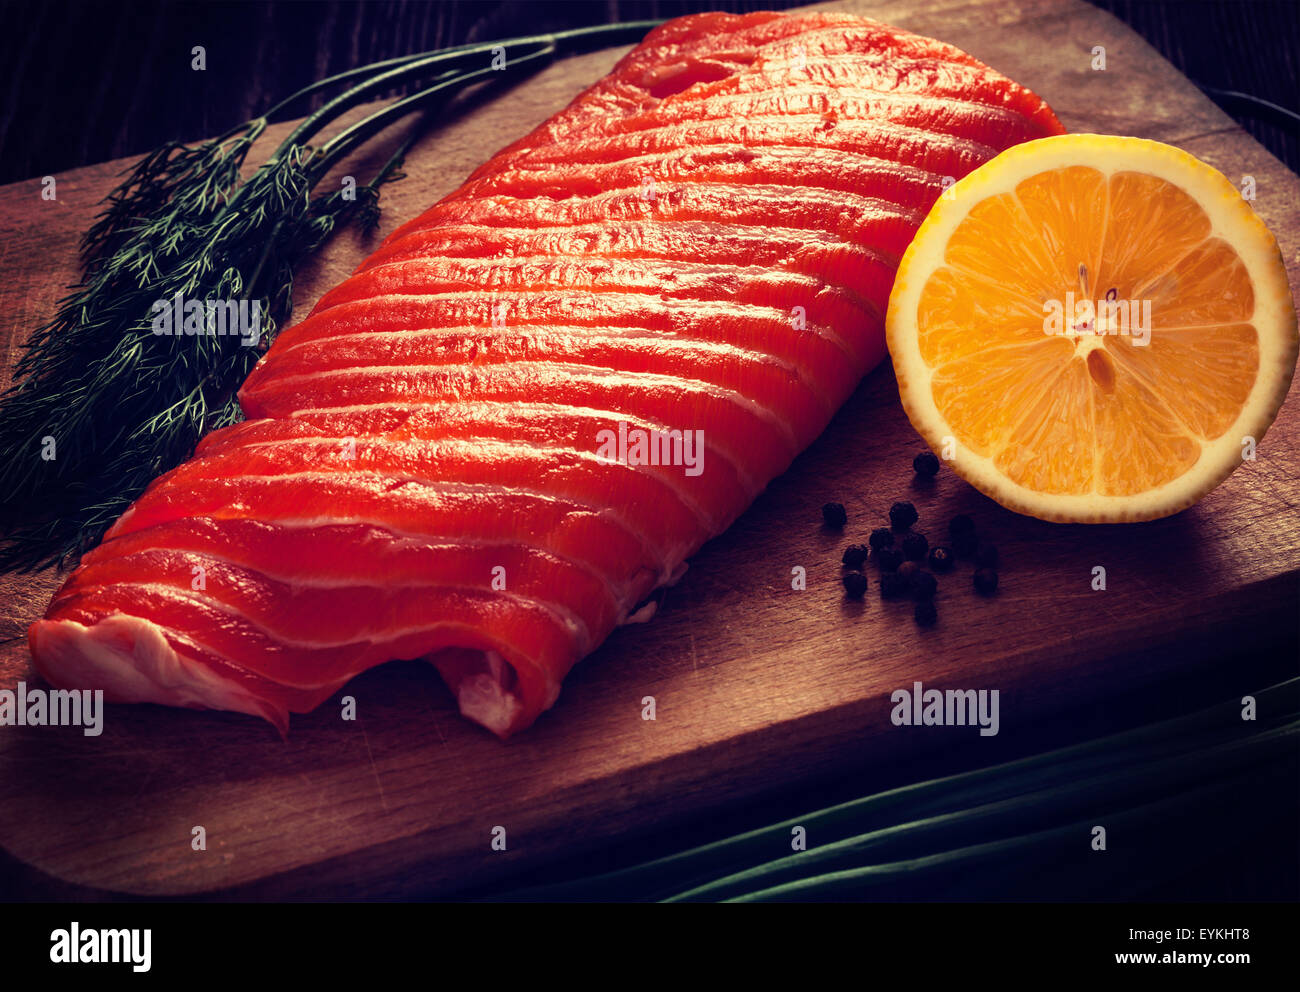 Vintage retro effect filtered hipster style image of fresh salmon piece on wooden cooking board with vegetables Stock Photo